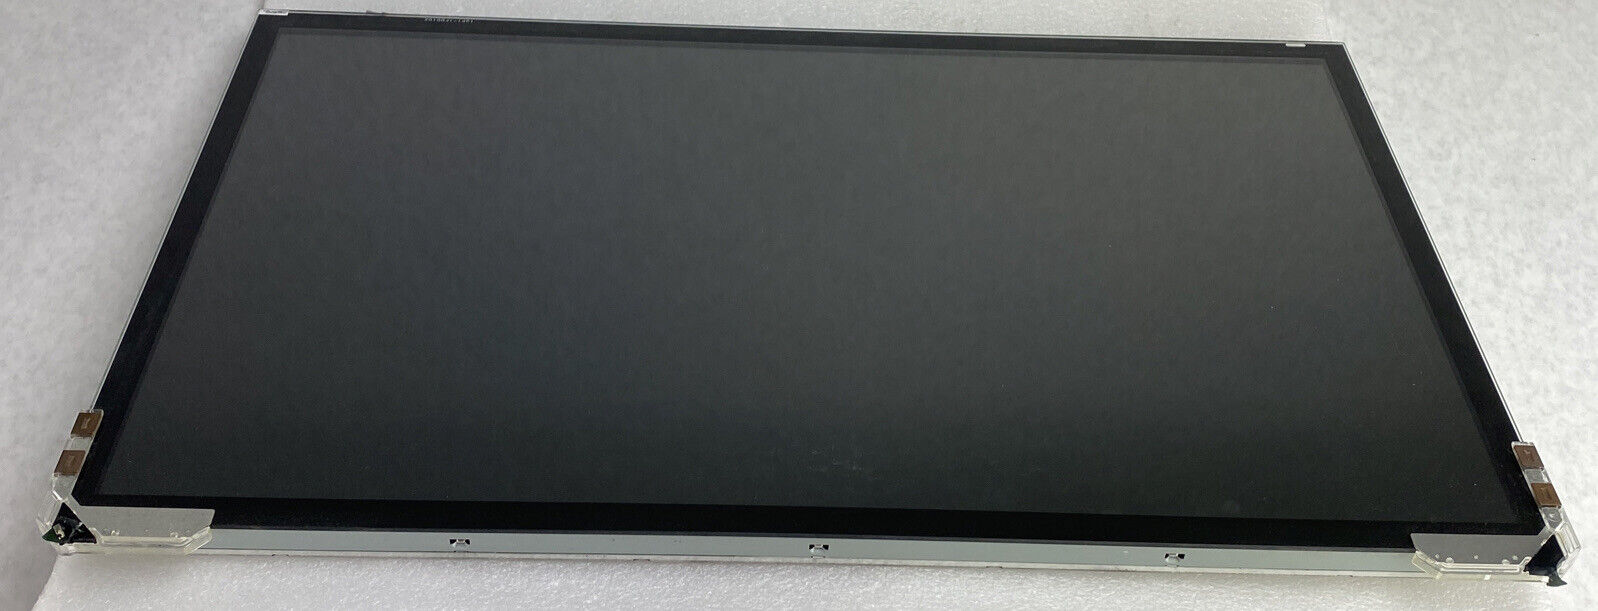 LG LM230WF1 TL B3 23" LCD Glossy Touch Screen from HP Touchsmart 9100